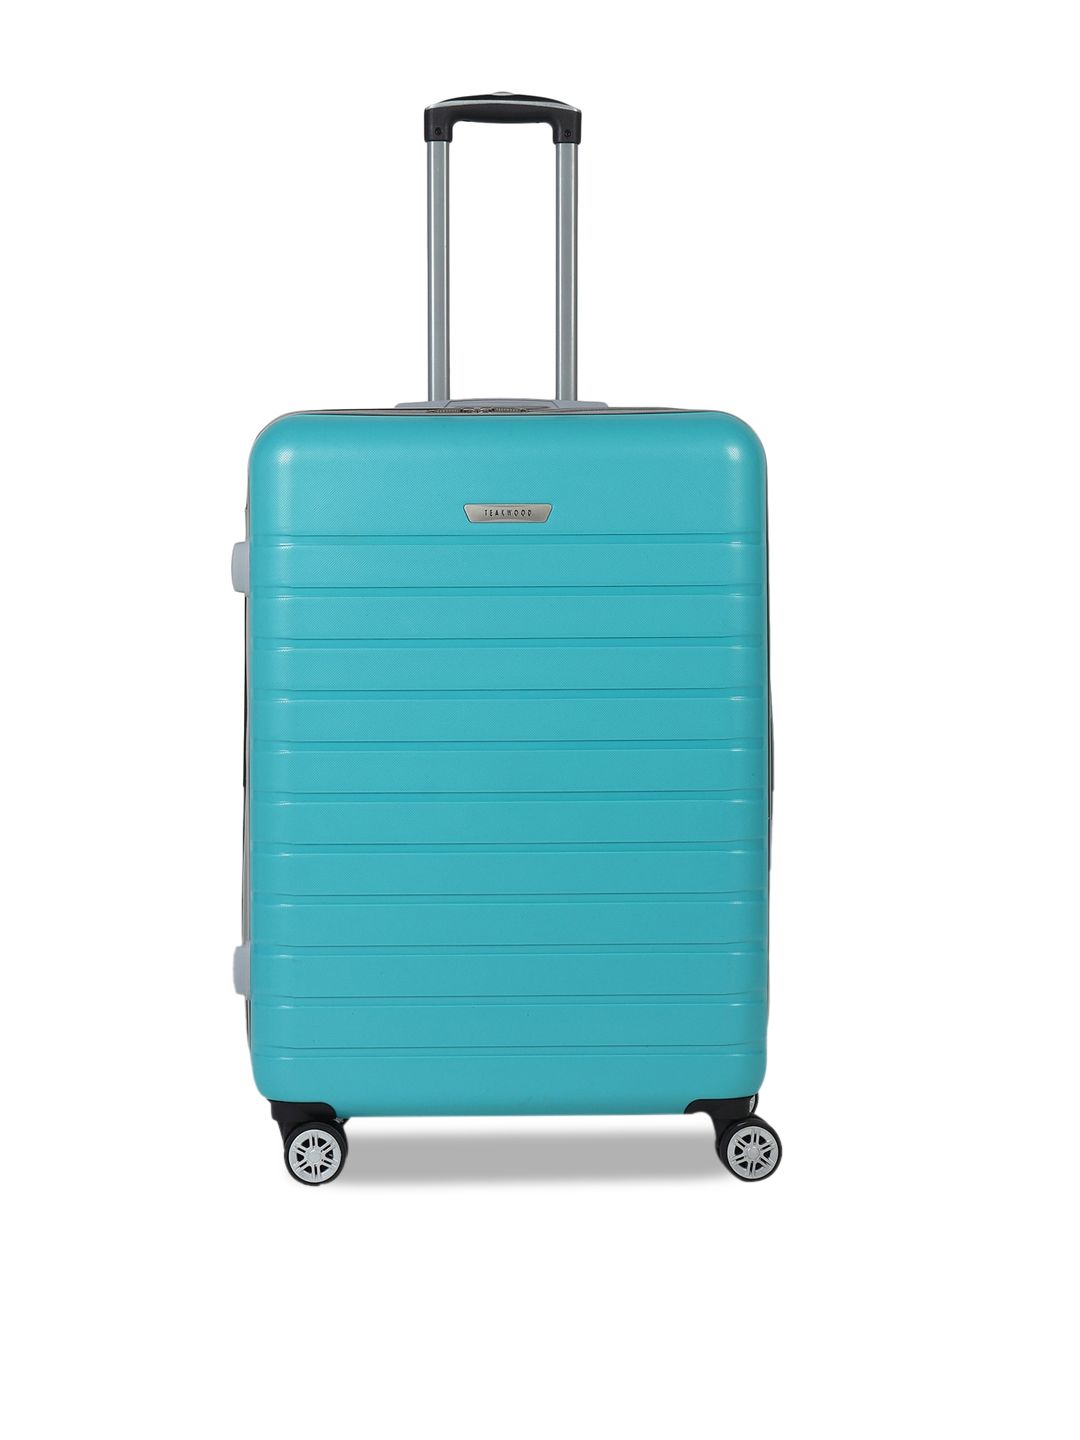 Teakwood Leathers Turquoise Blue Textured Hard-Sided Large Trolley Suitcase Price in India